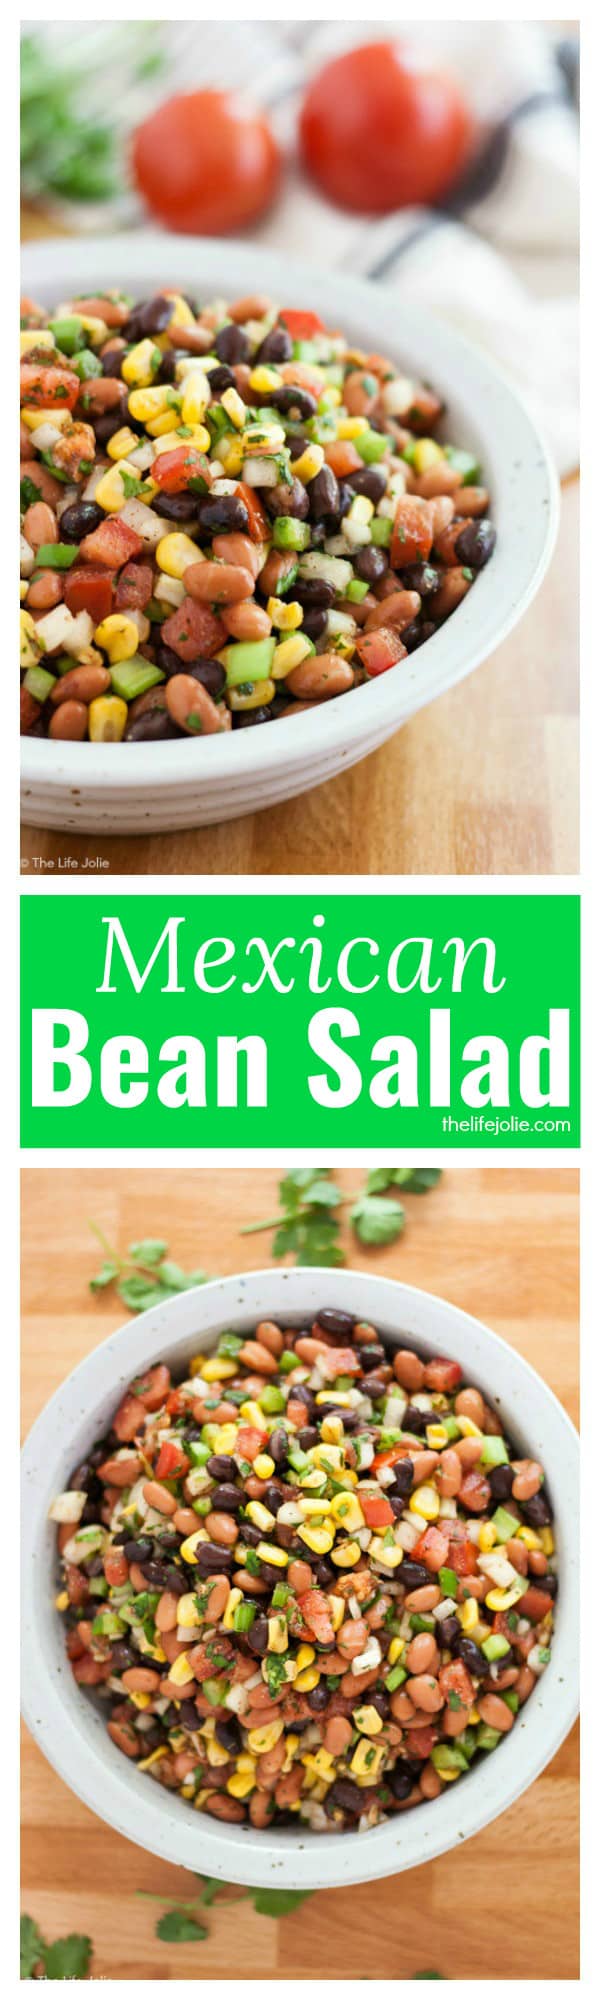 This Mexican Bean Salad recipe makes a quick and simple salad. It's healthy and easy to make and is so full of delicious flavor!